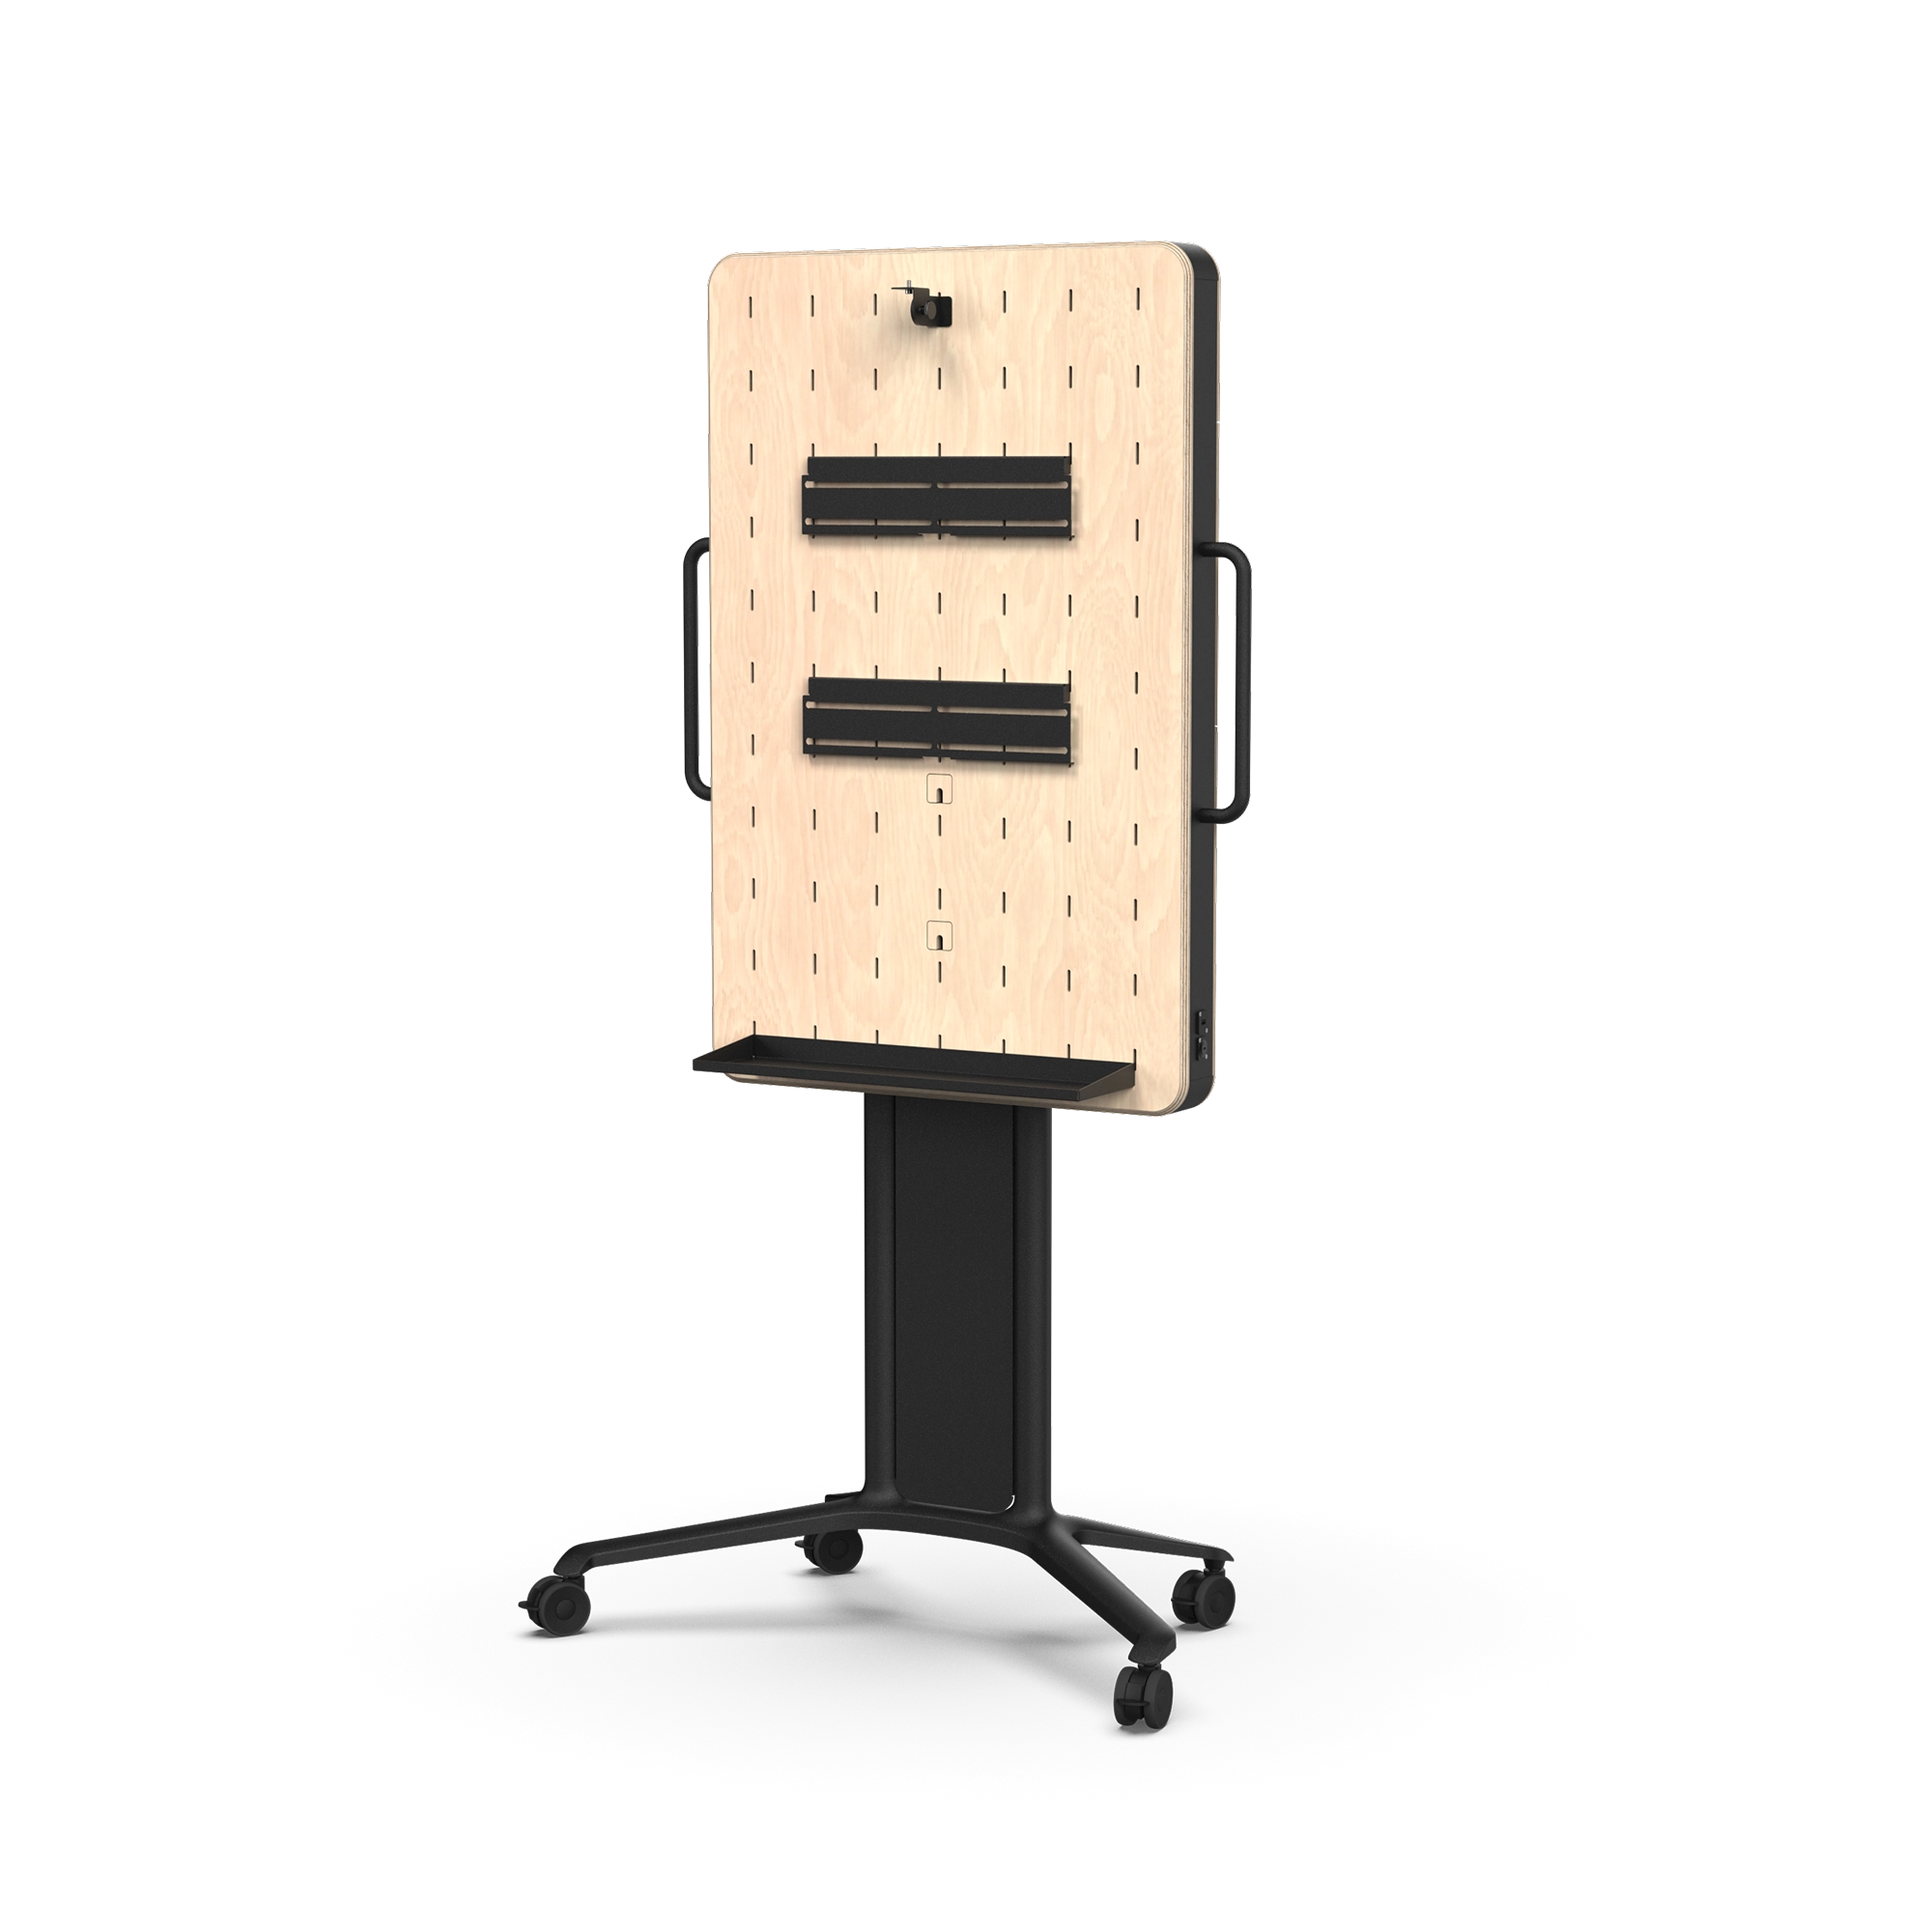  <span class="!font-bold">Peggy One,</span> a floorstand made to encourage collaboration, engagement and equality within teams. With a clear focus on mobility and flexibility, Peggy One provides a hassle-free integration of your electronic equipment. Suitable for use in all areas of the office.